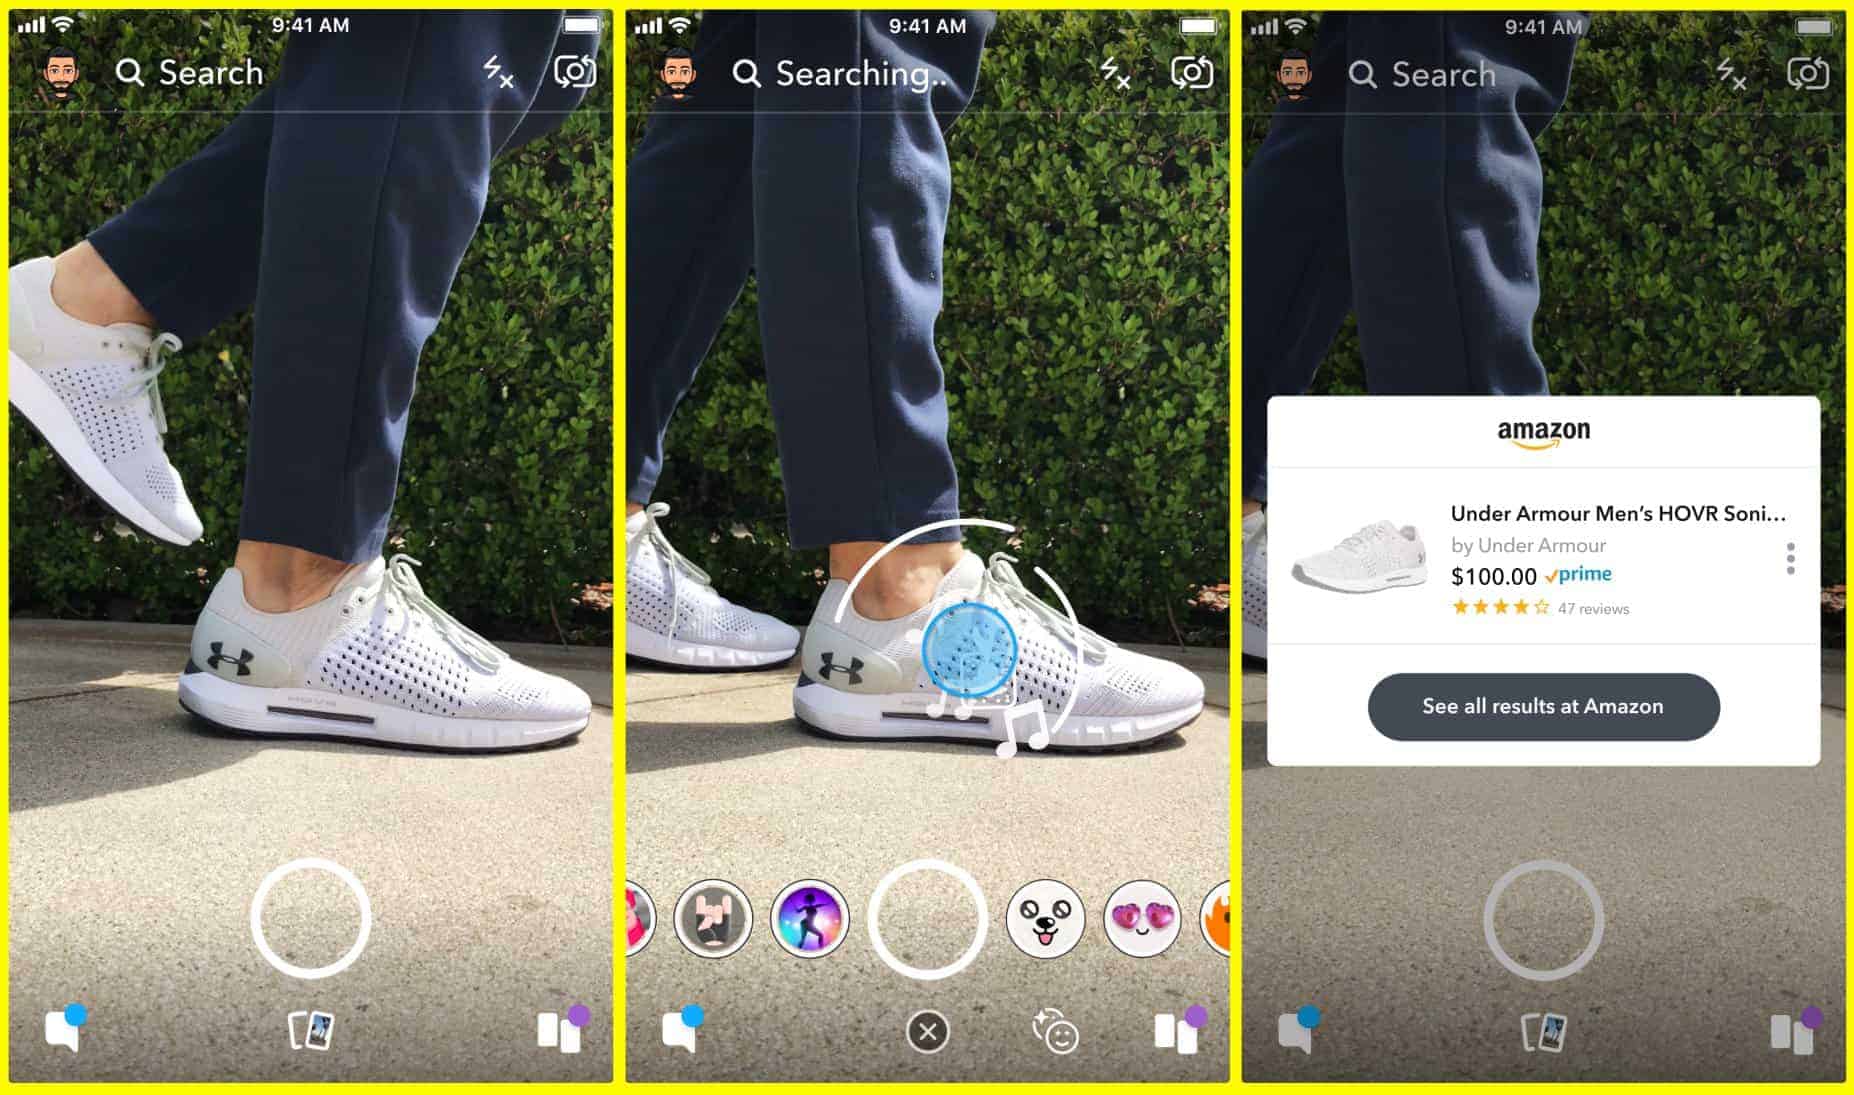 How to Shop on Amazon from the Snapchat Camera